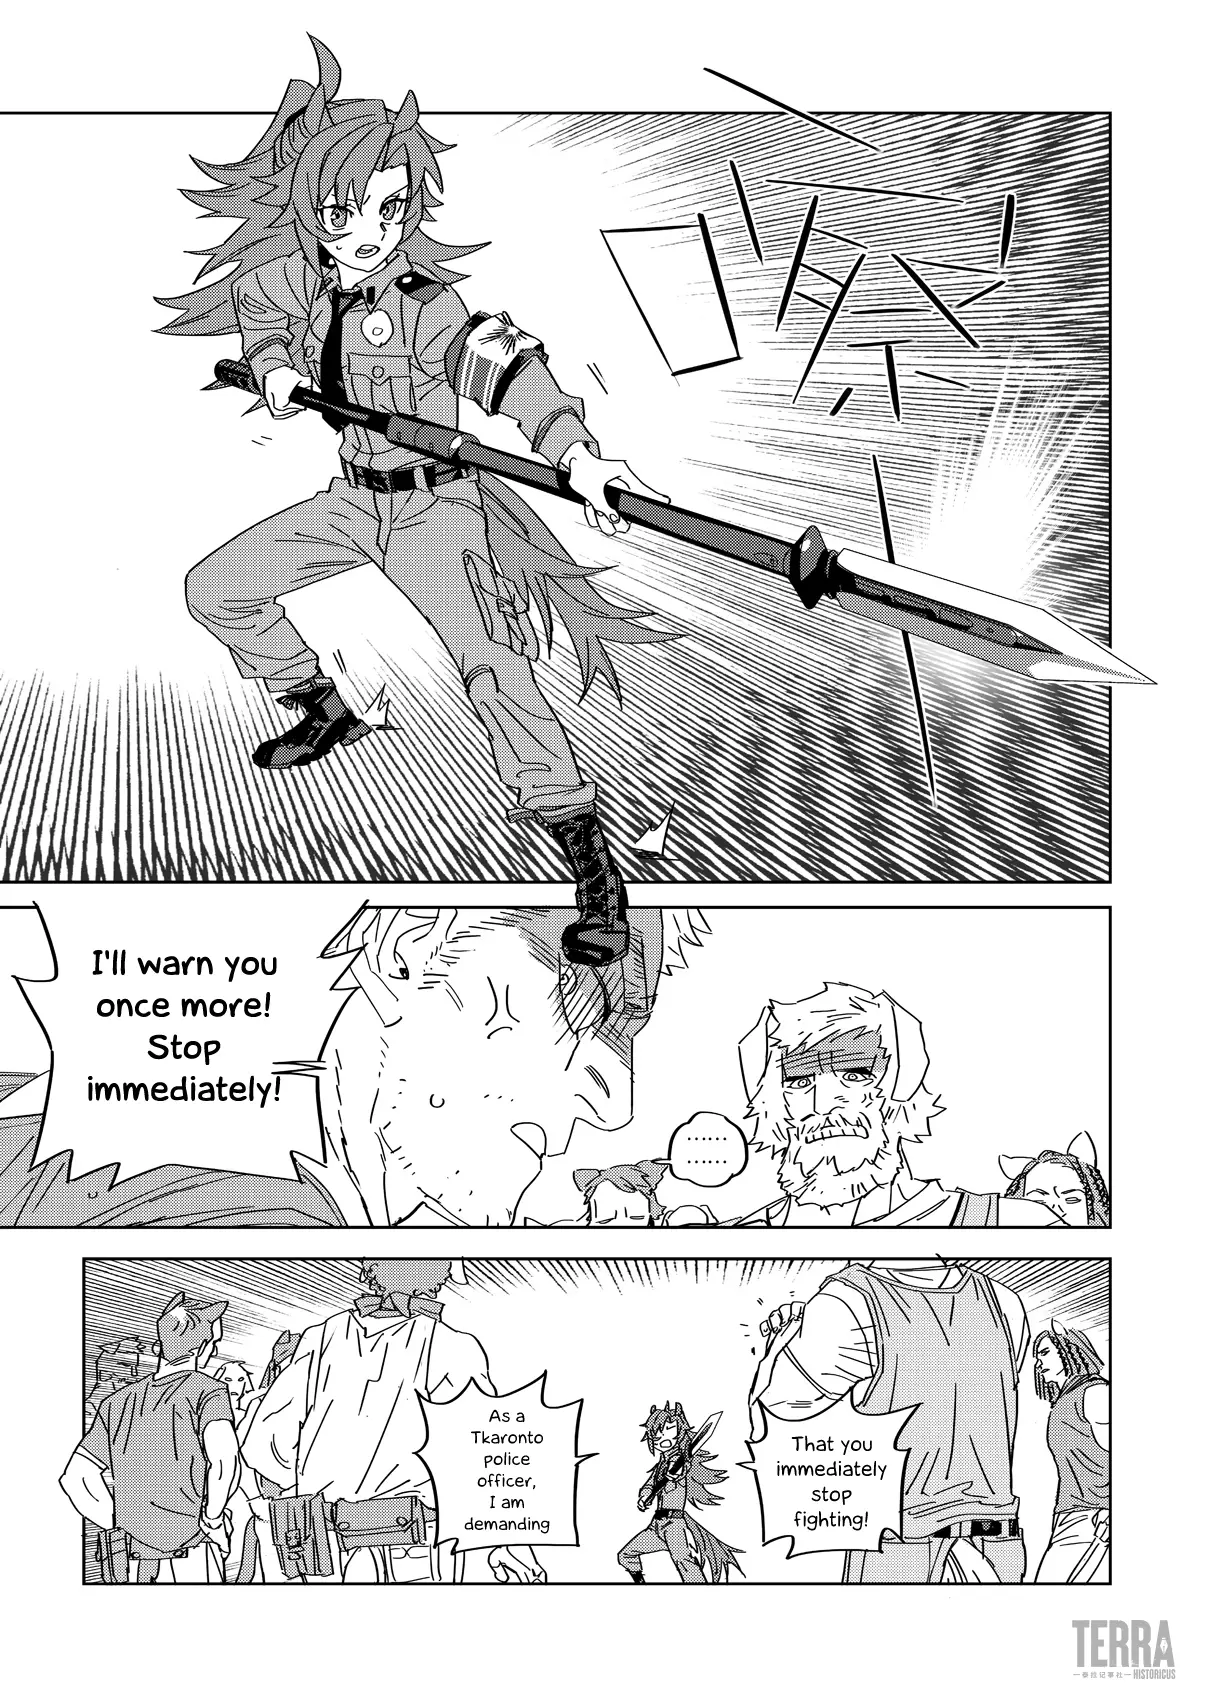 Arknights: A1 Operations Preparation Detachment - 1 page 18-032cf966